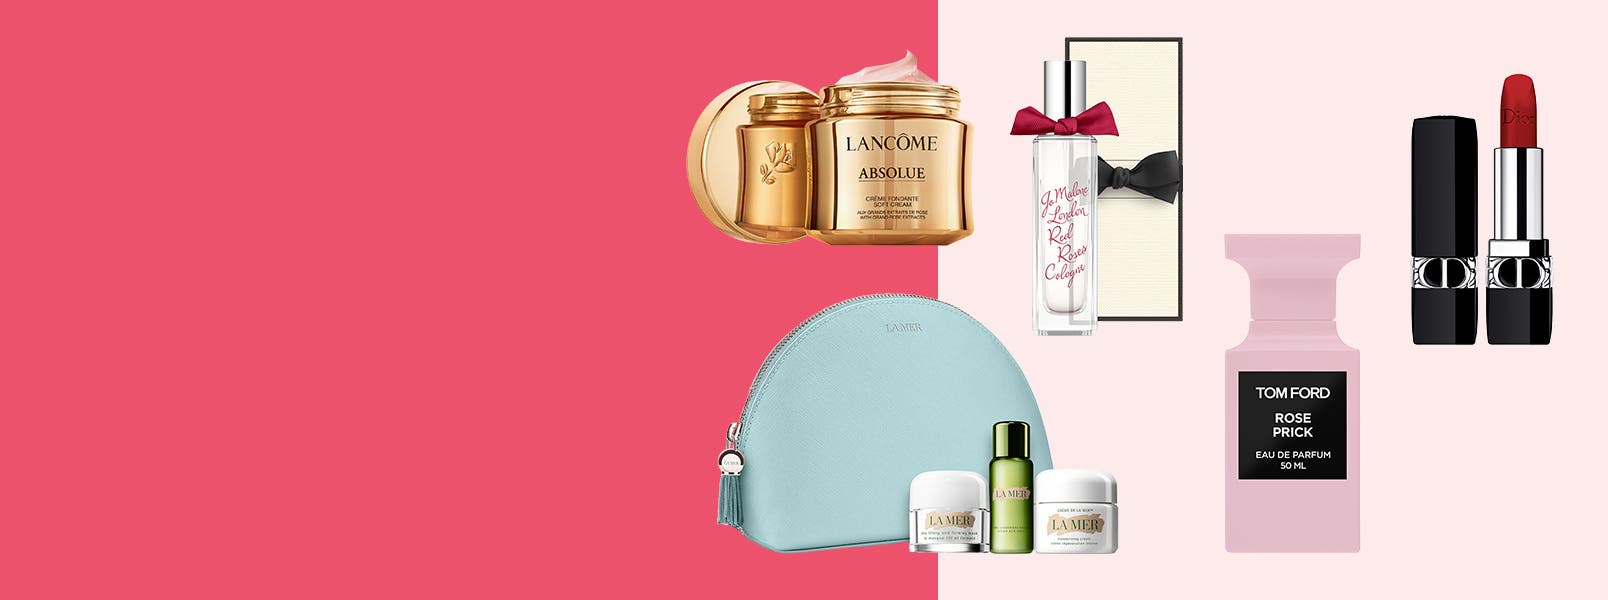 Valentine's Day gifts from Dior, Tom Ford, Jo Malone, La Mer and Lancôme